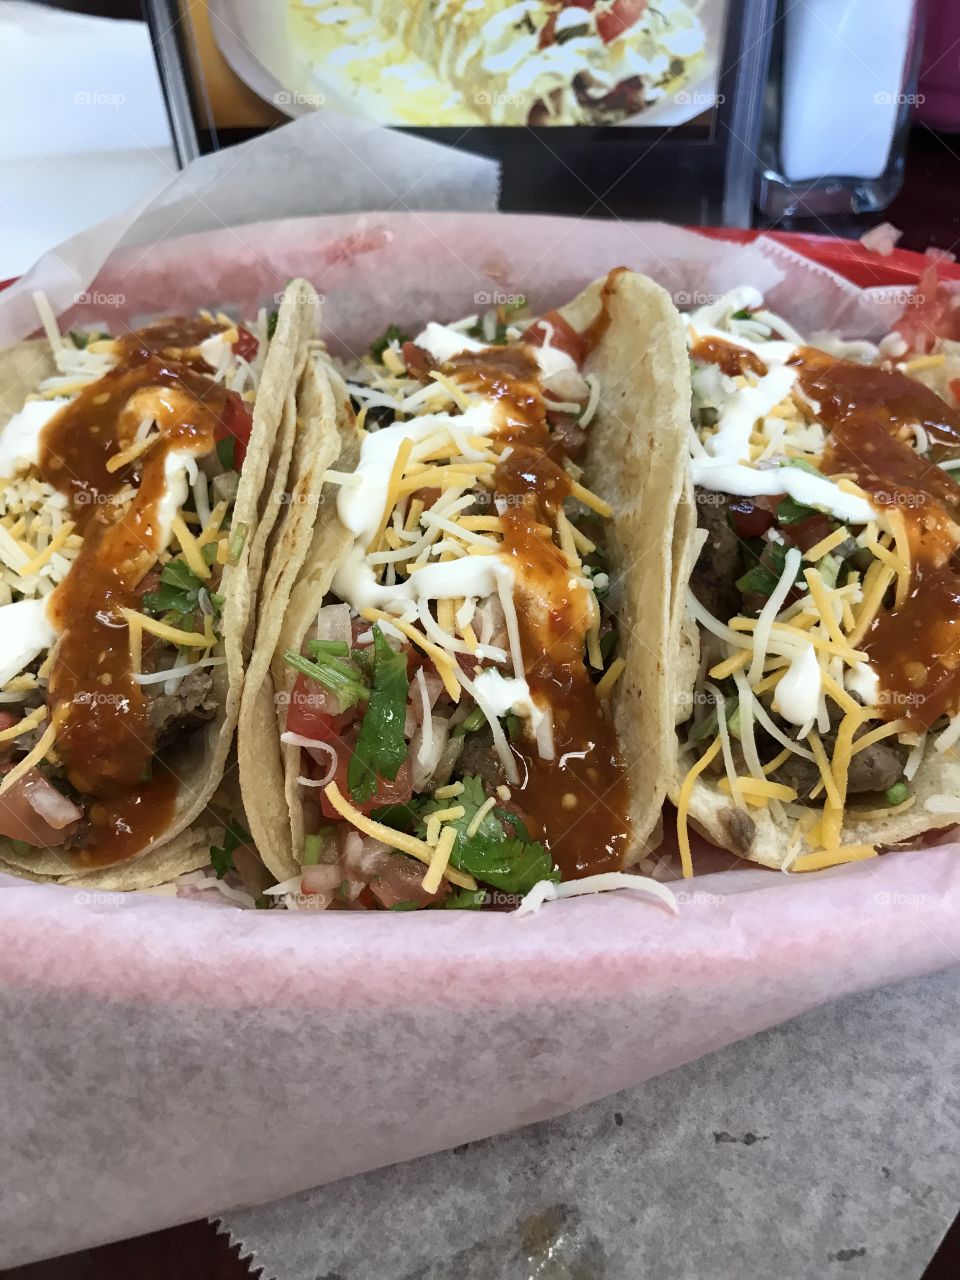 Real tacos!